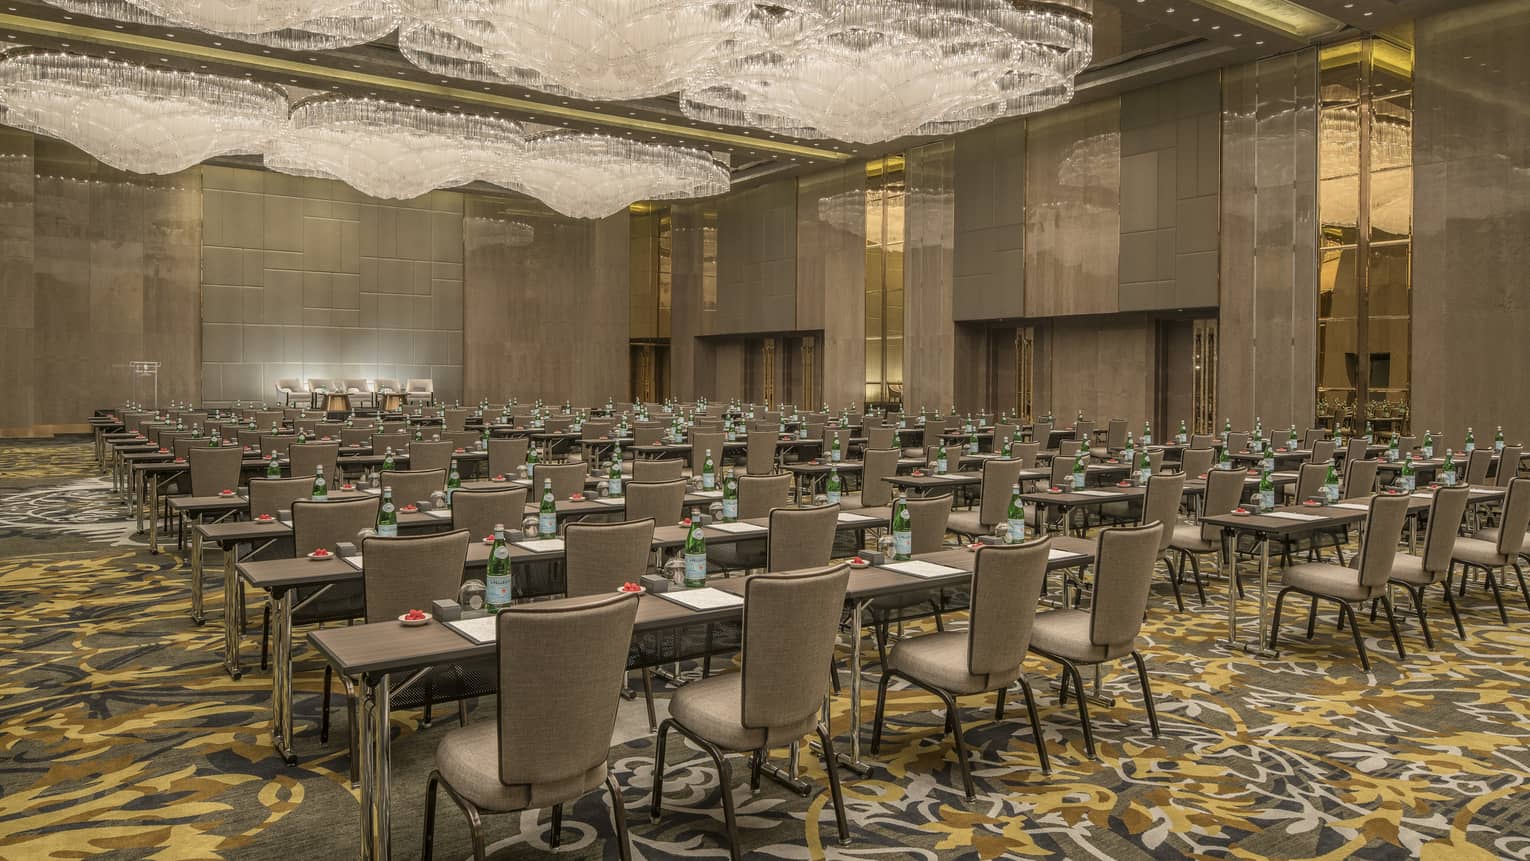 Rows of meeting tables, chairs under large crystal chandeliers in carpeted ballroom